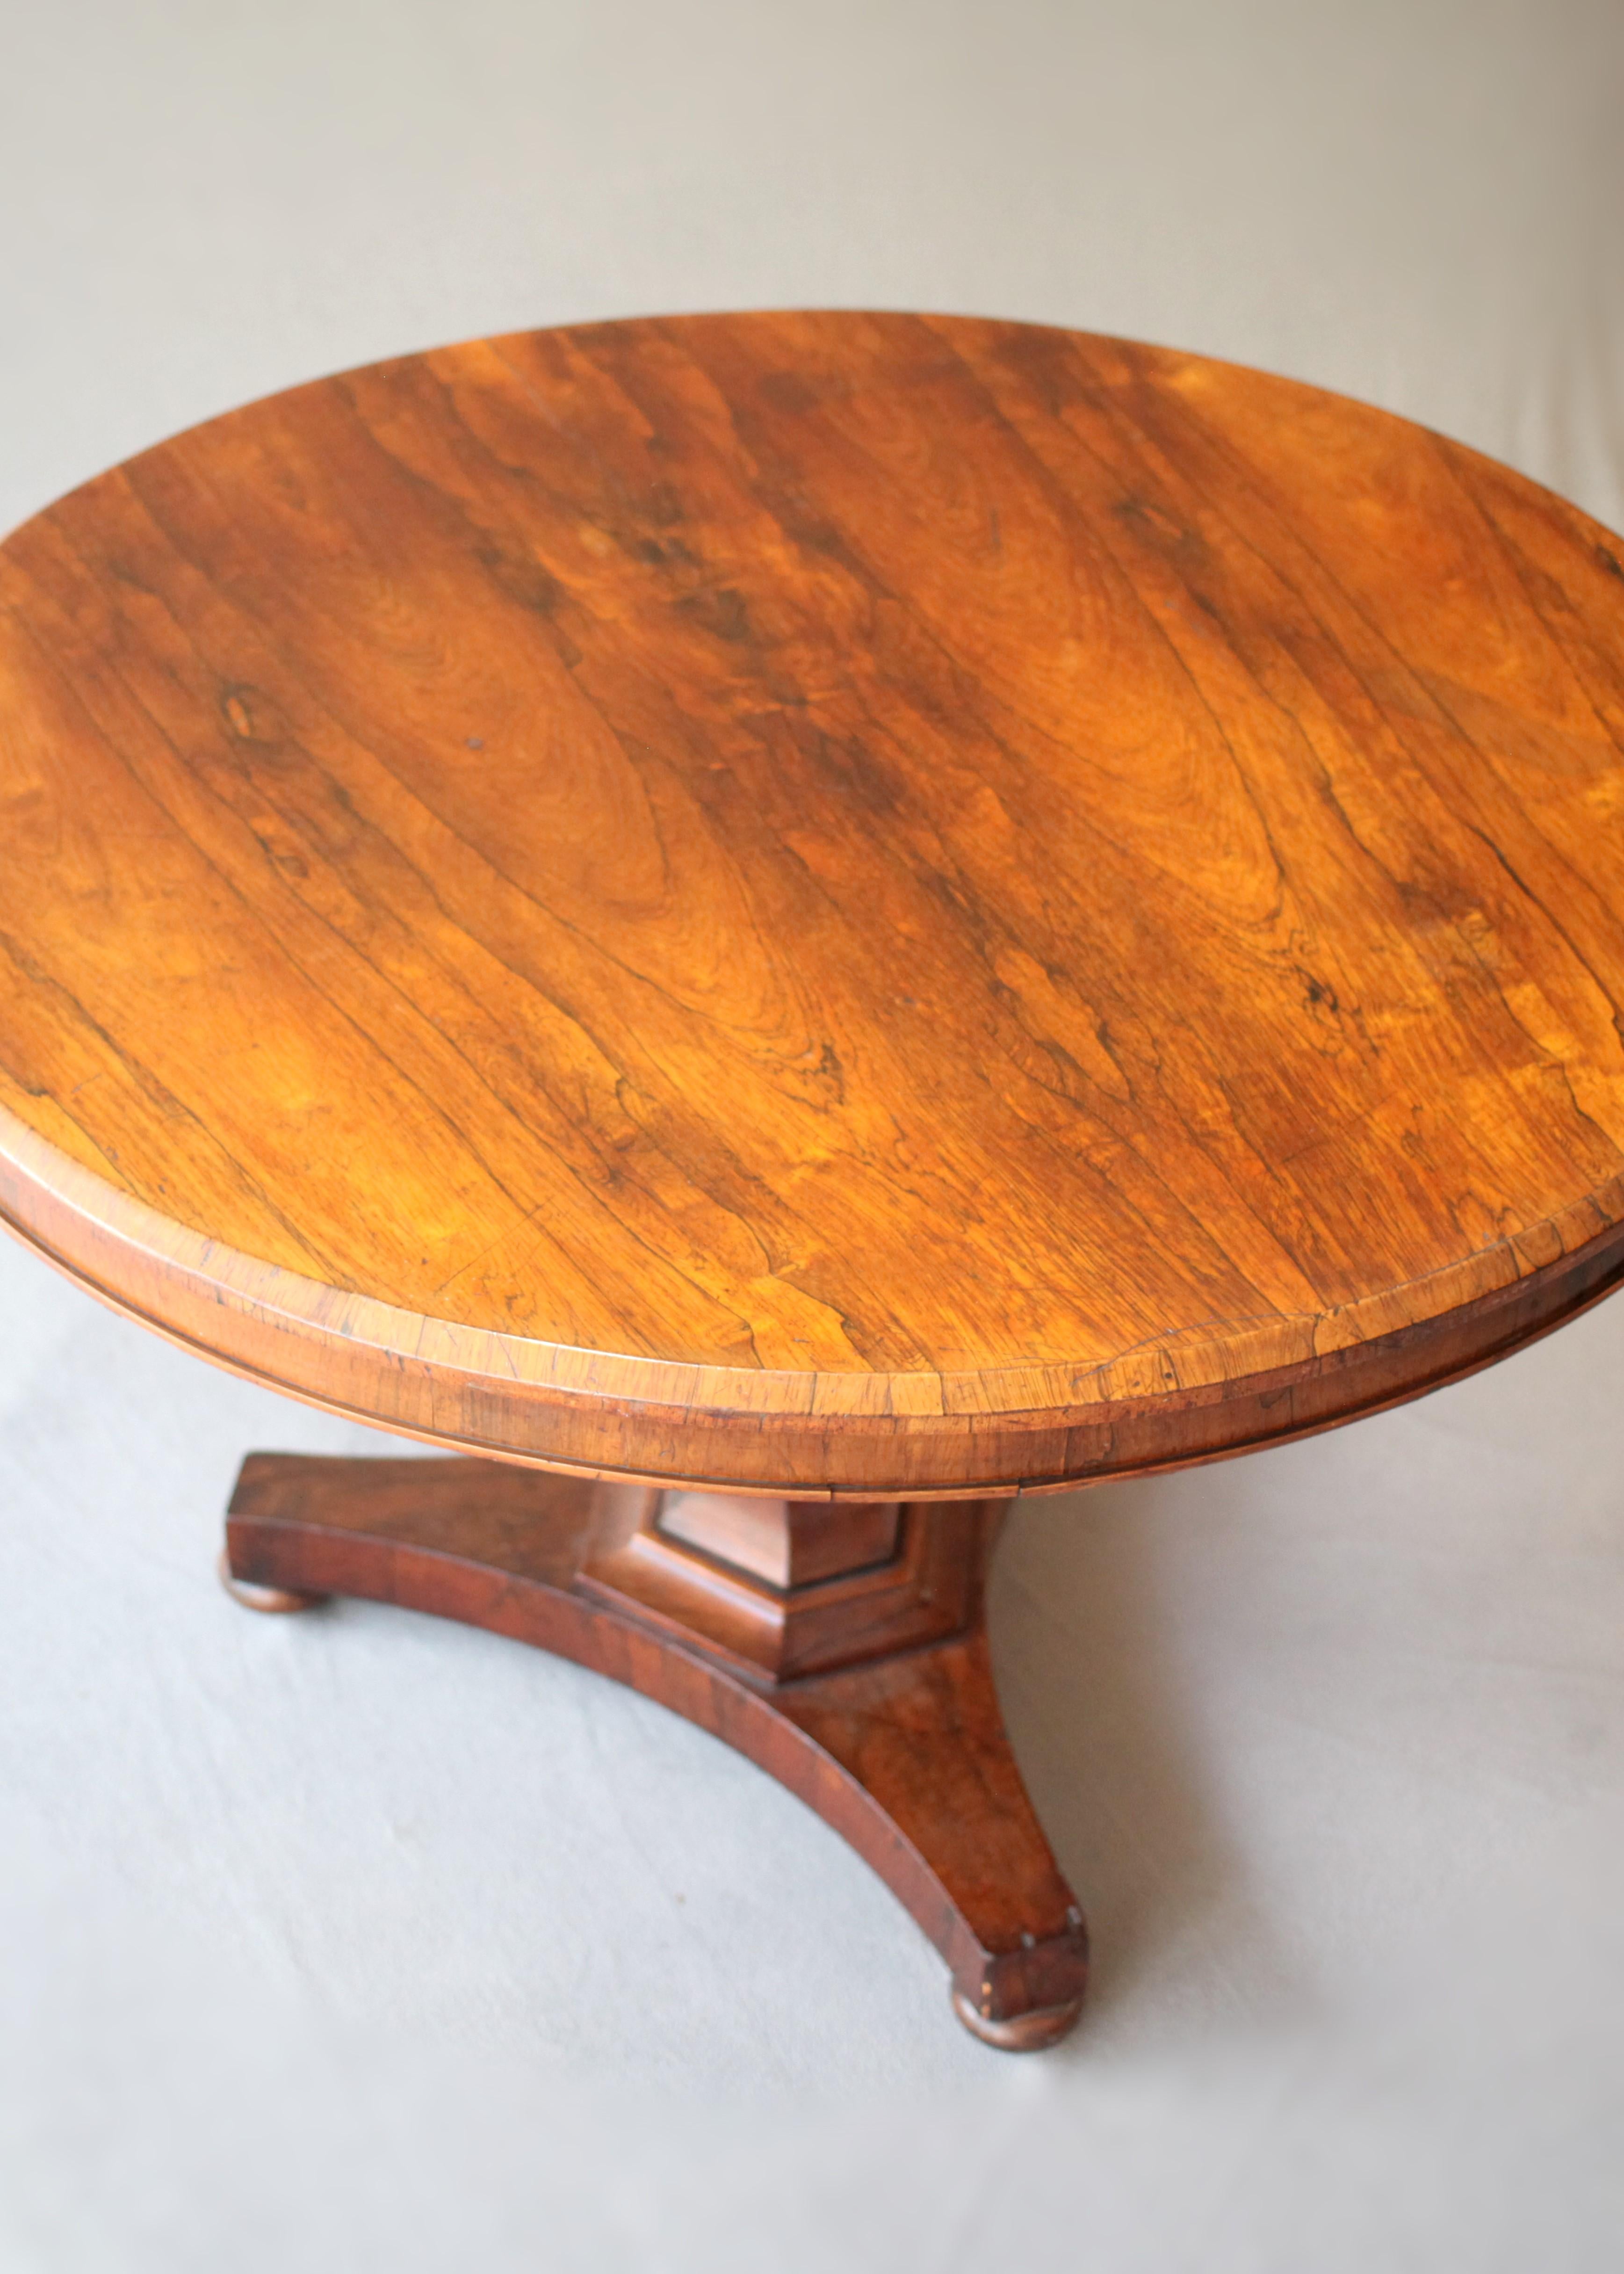 This 19th Century English Empire Walnut Centre Table is an iconic representation of timeless English craftsmanship. At the heart of its appeal is the attractively rendered walnut surface that exudes a warm, inviting hue. The harmonious marriage of